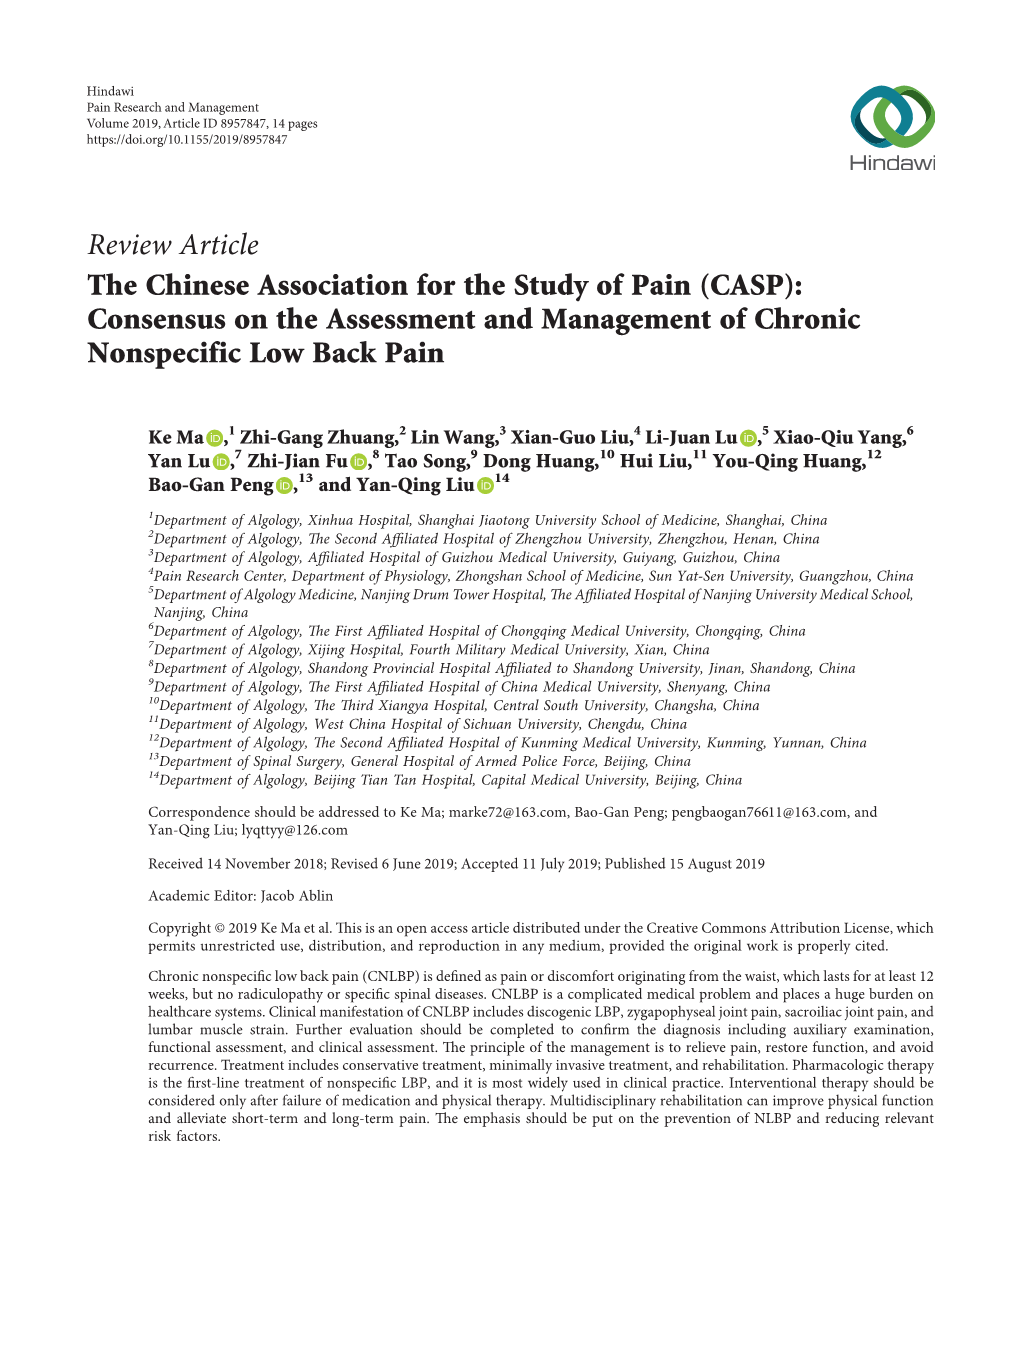 Consensus on the Assessment and Management of Chronic Nonspecific Low Back Pain